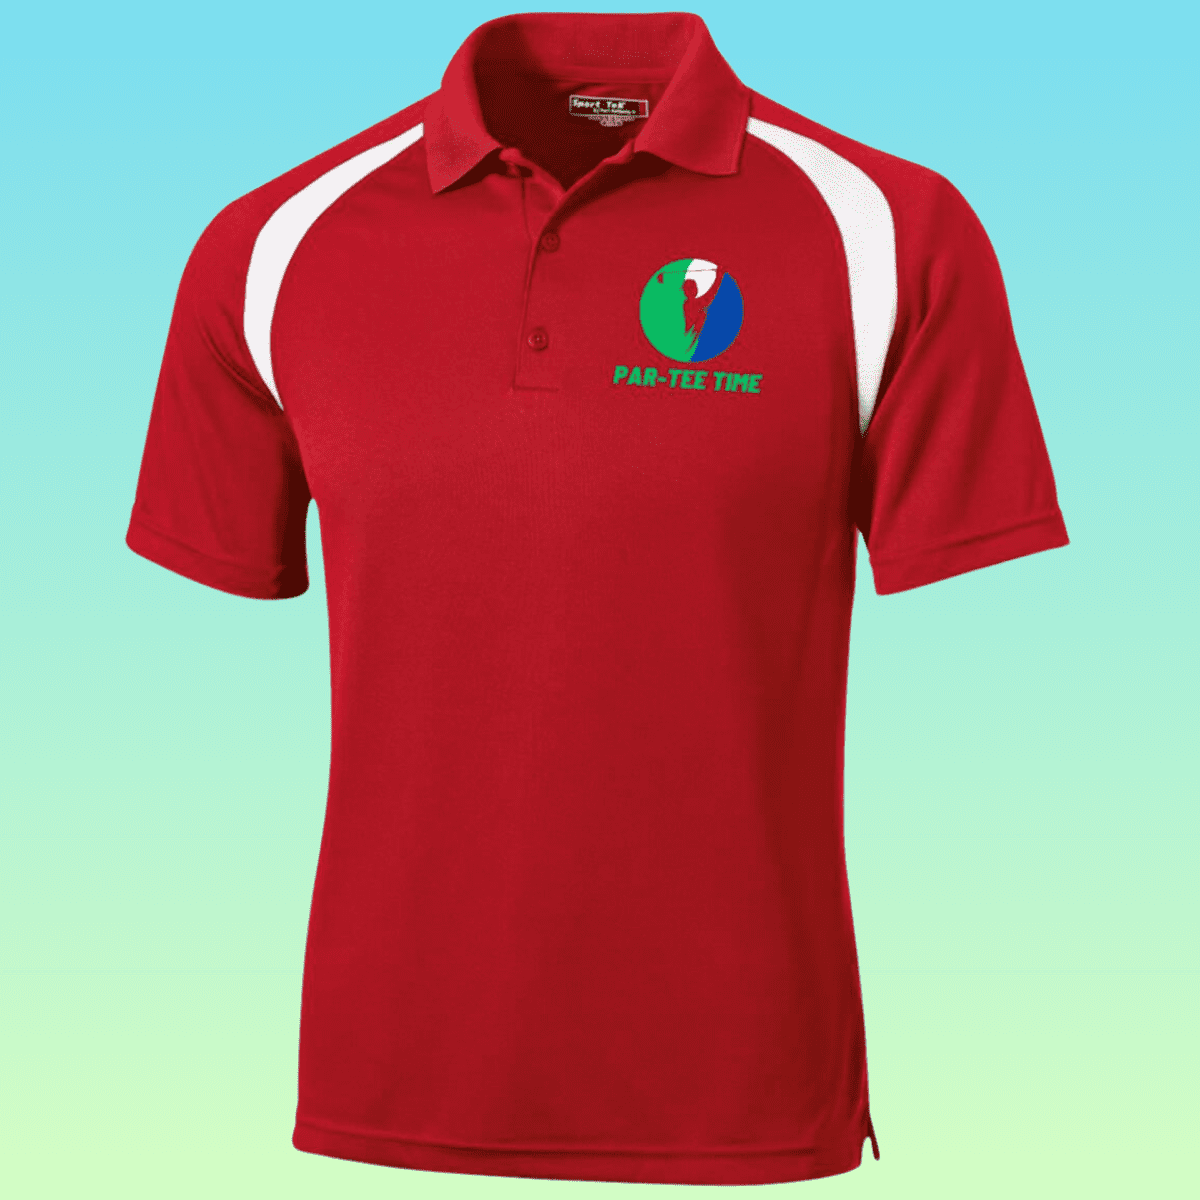 Men's Red and White Golf Par-tee Time Moisture-Wicking Polo Shirt